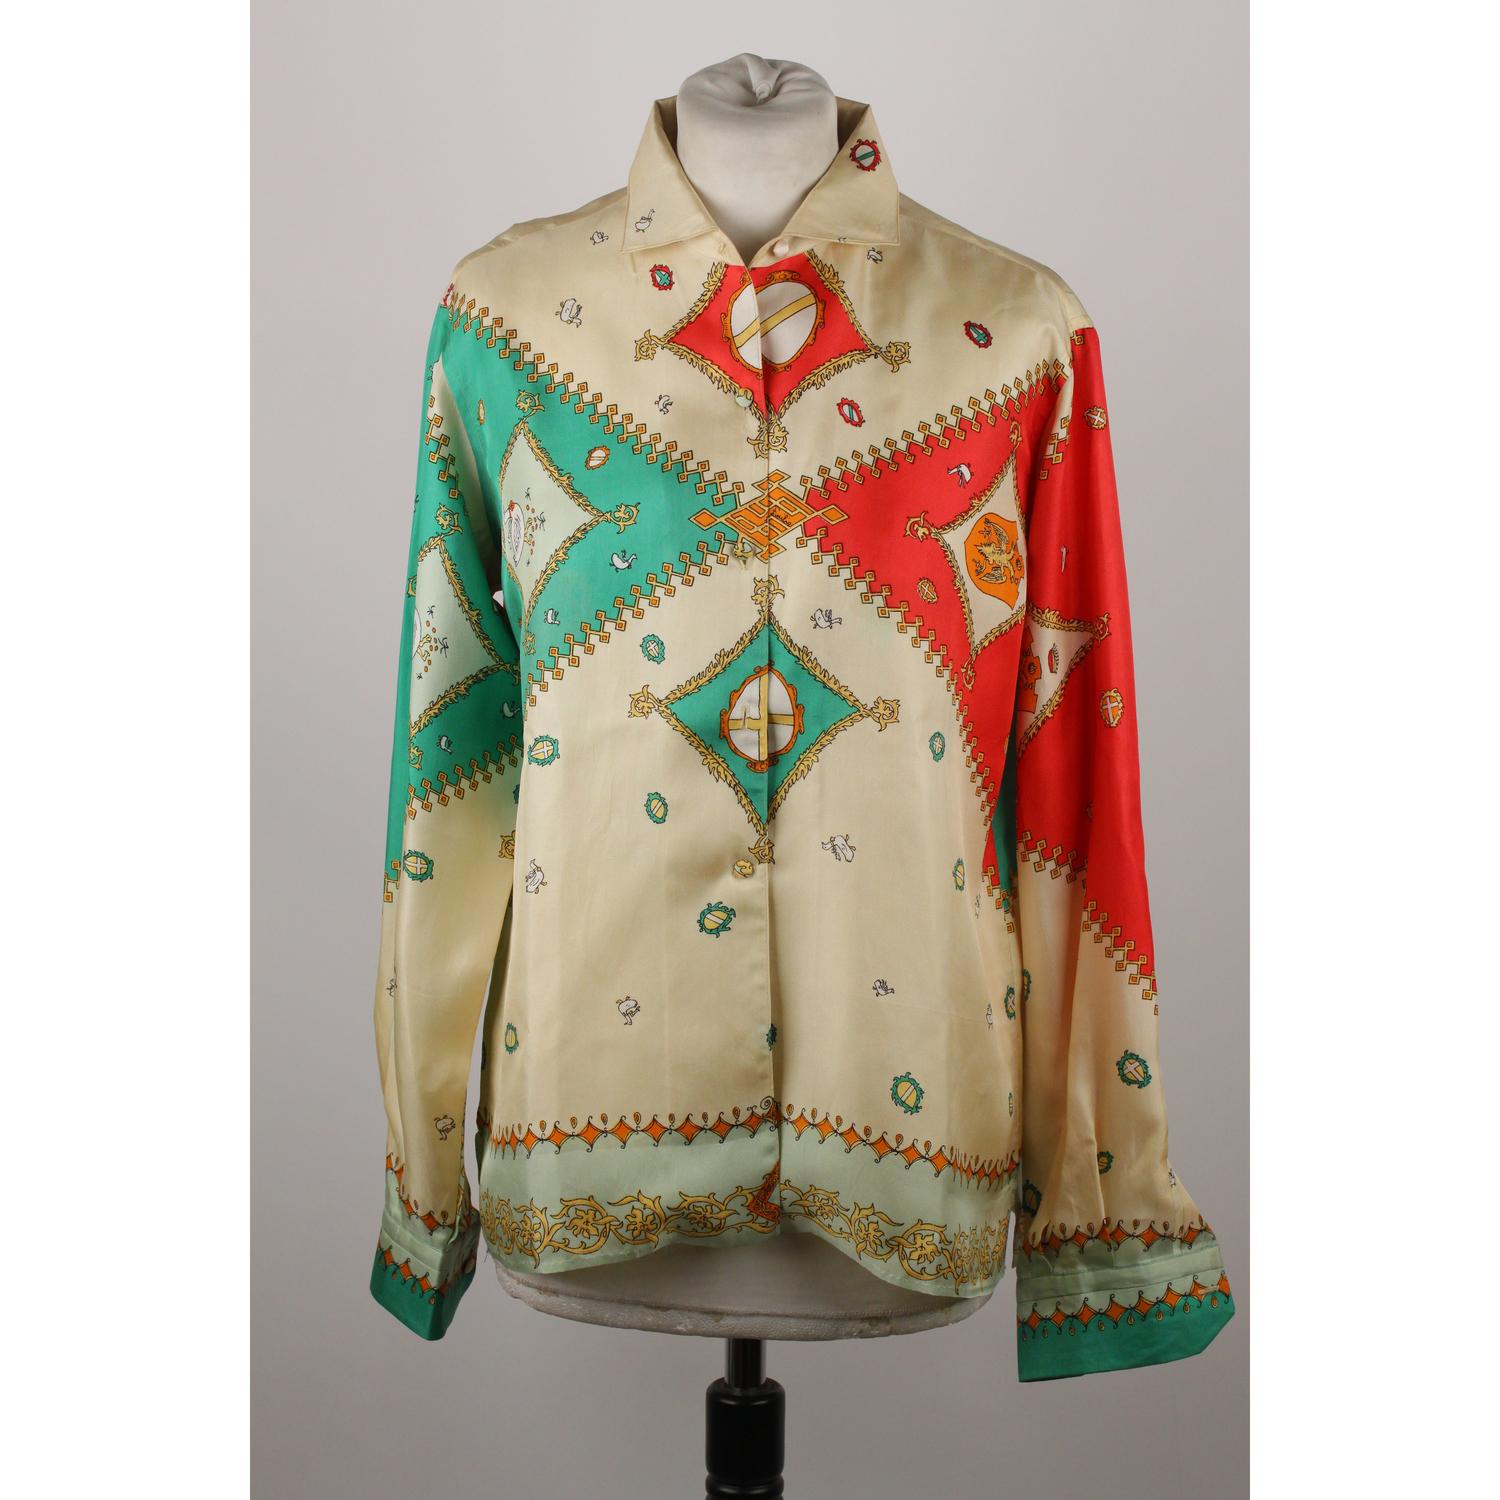 Rare vintage Emilio Pucci 100% silk  button down shirt from the 1957 'Palio di Siena Collection'. 

In 1957 florentine designer Emilio Pucci dedicated an entire collection to the remarkable event of Palio di Siena. The 'Palio Collection' was